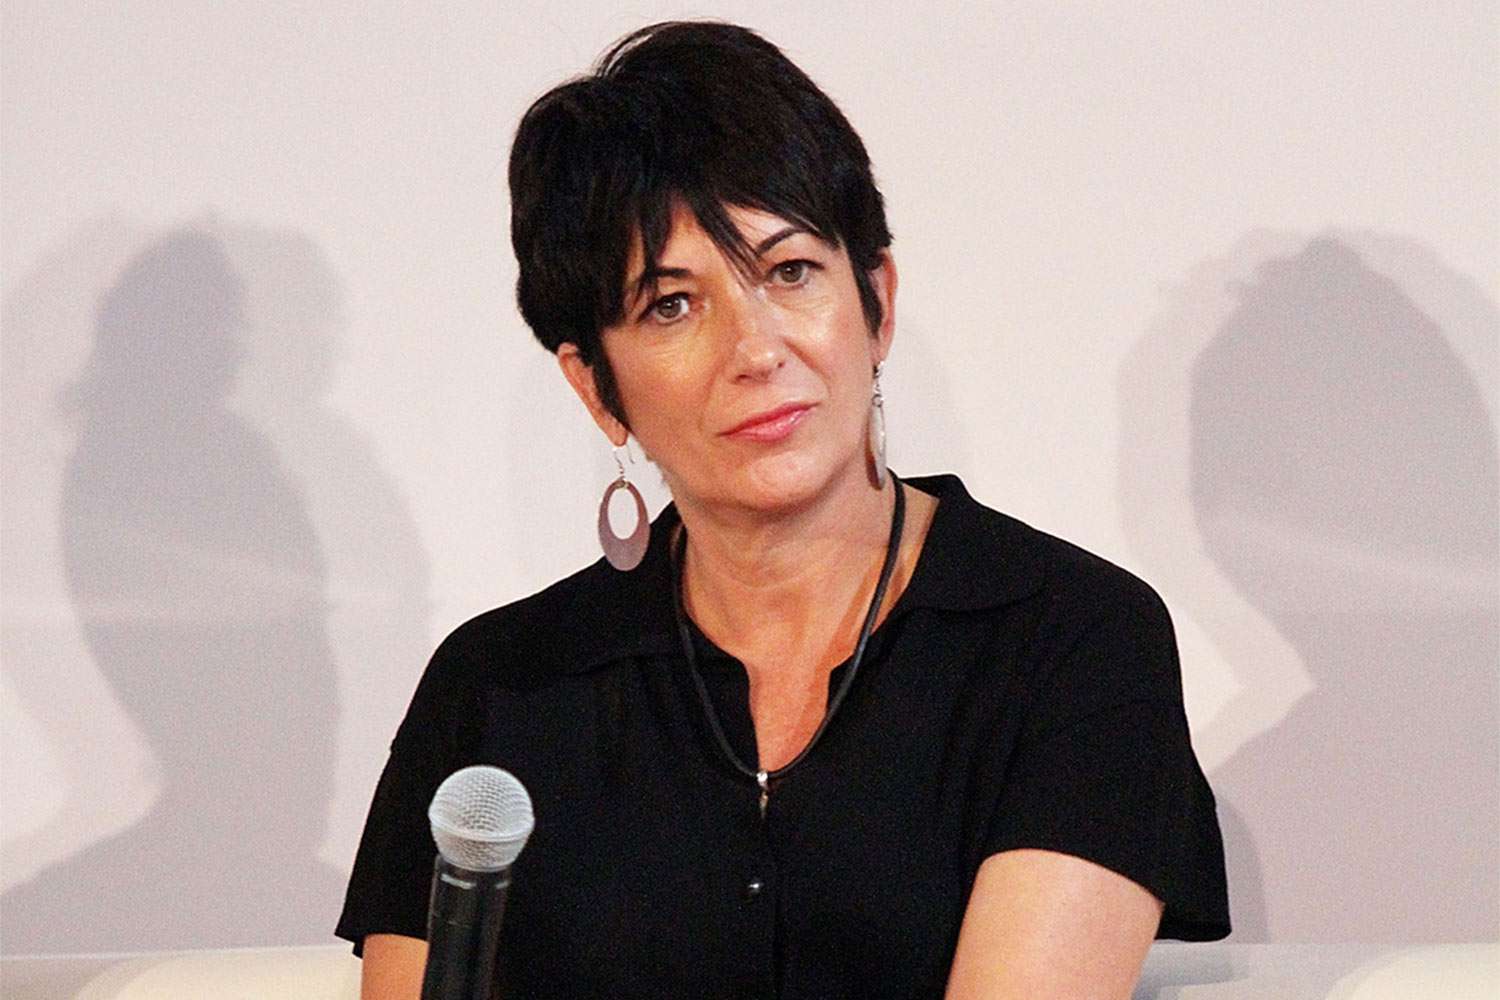 Ghislaine Maxwell, Accomplice to Jeffrey Epstein, Gets 20 Years in Prison for Sex Trafficking